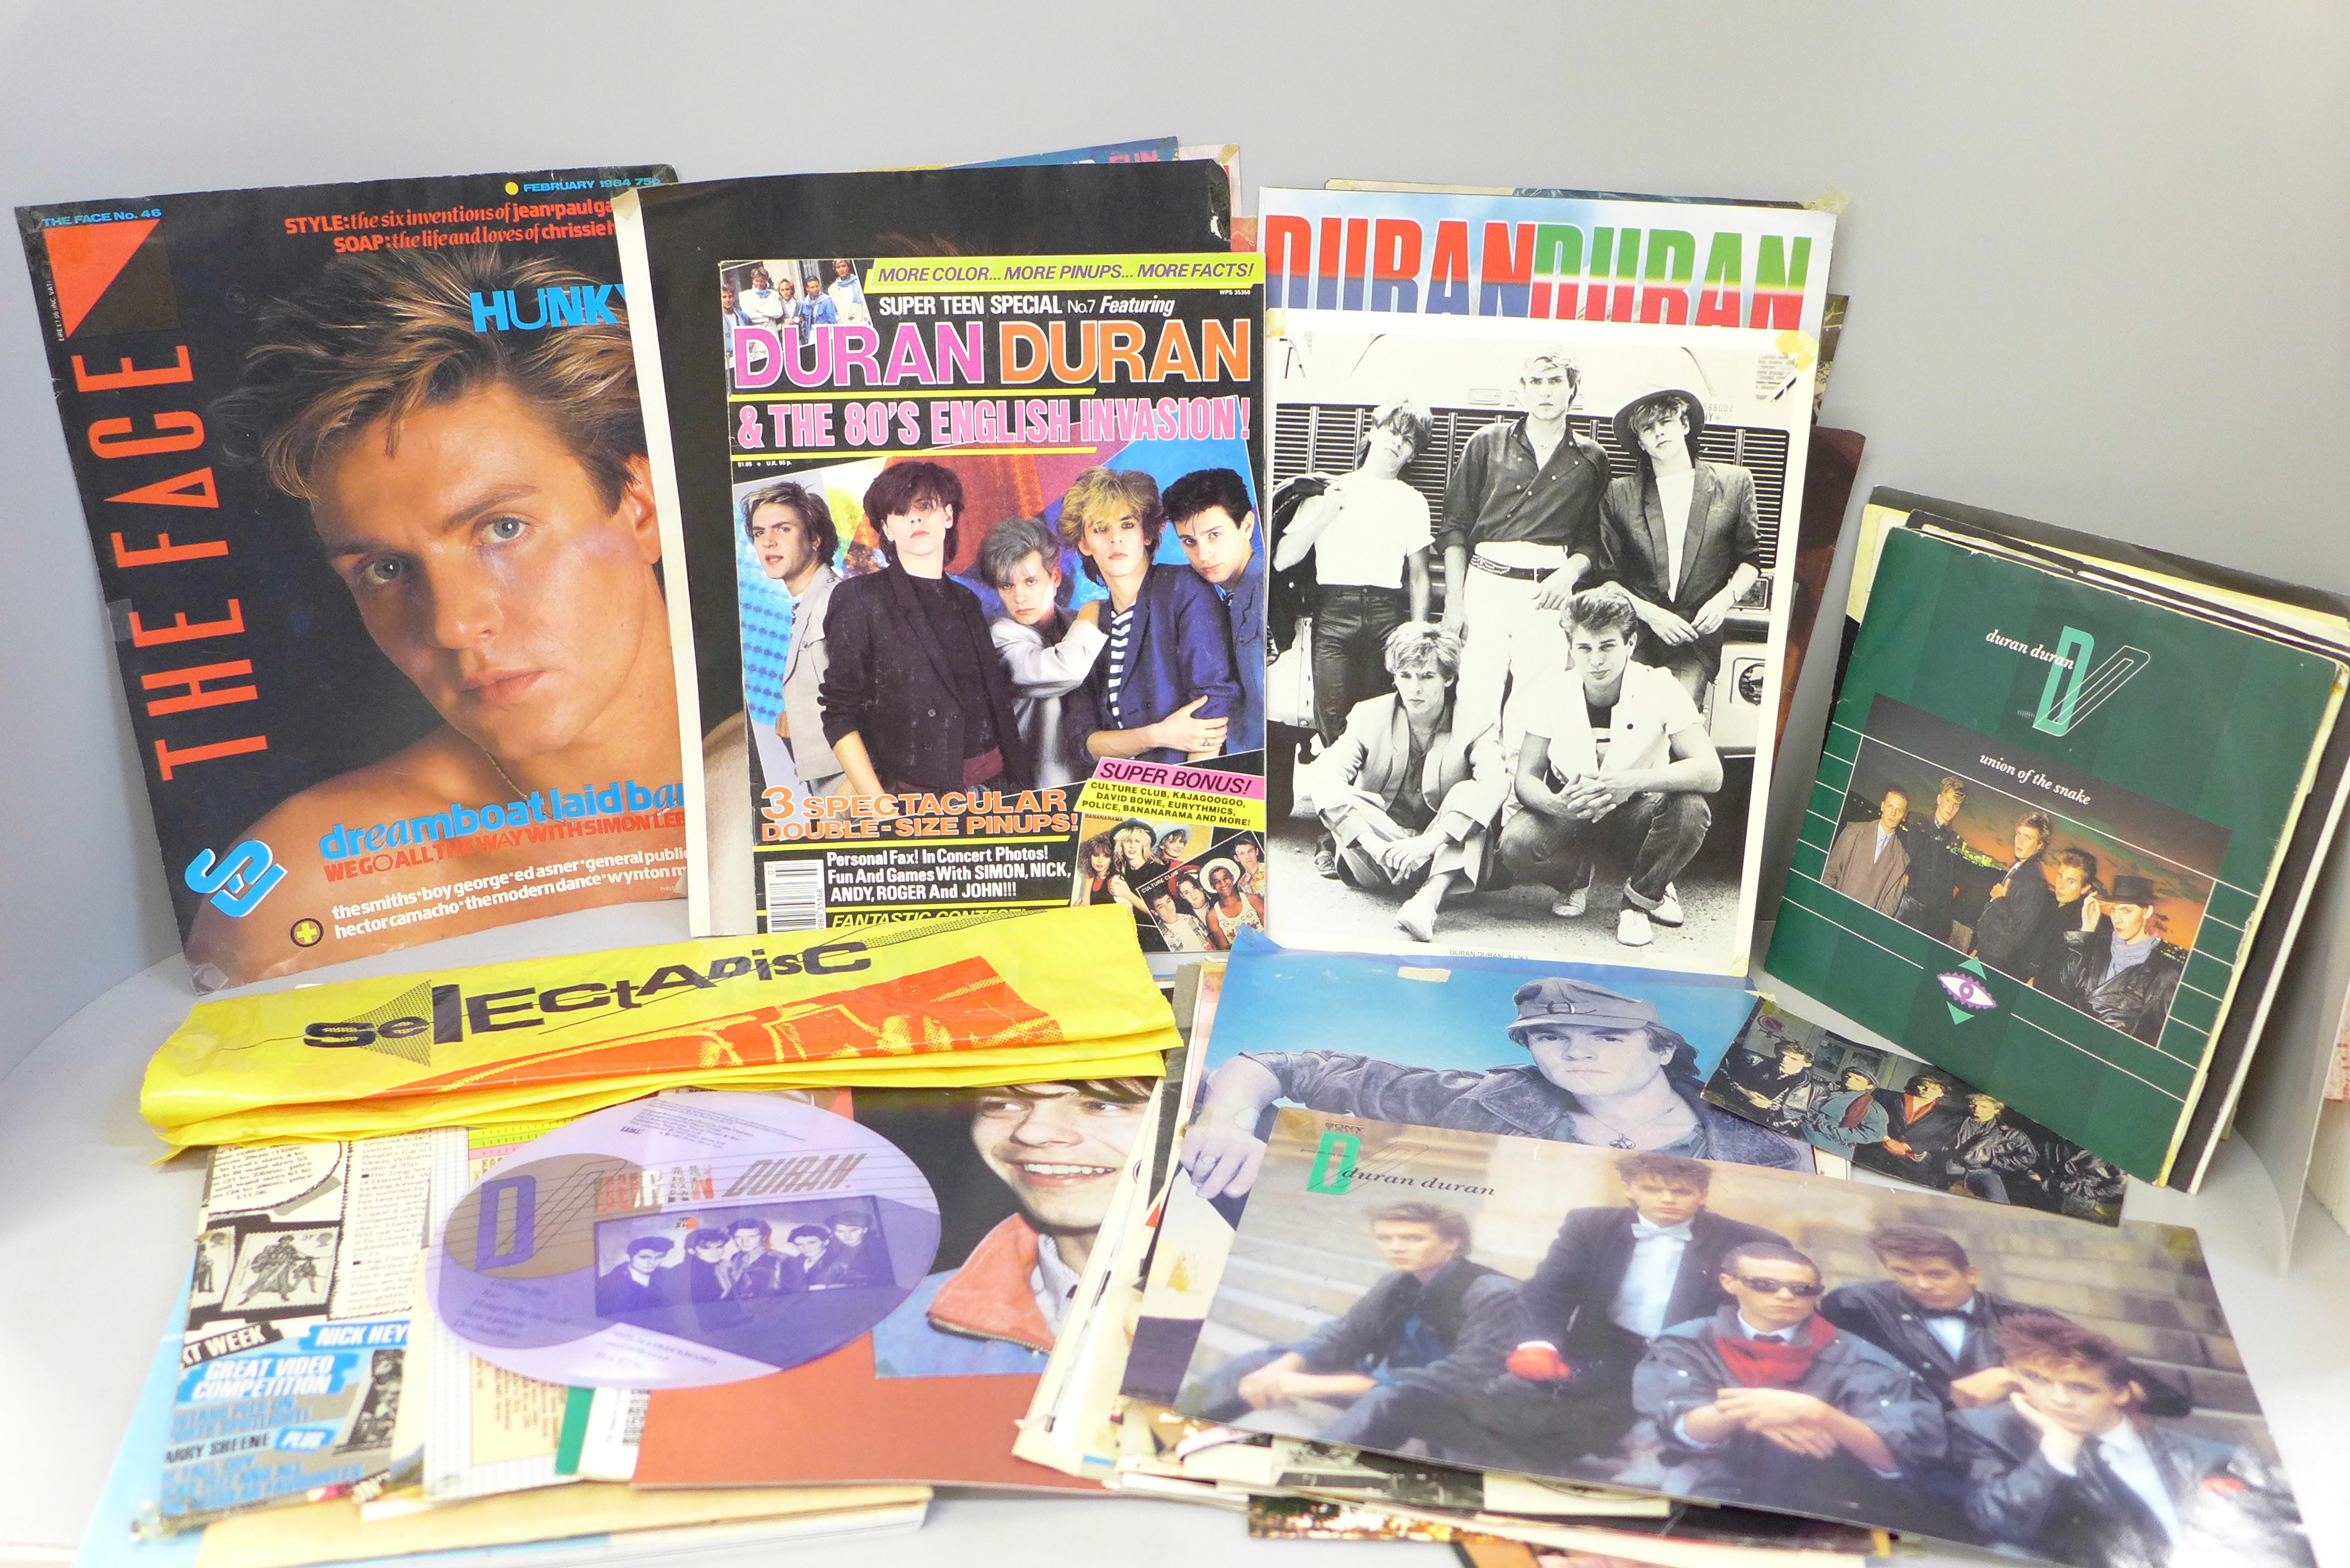 Duran Duran memorabilia including singles, posters, a book and fan club newsletters